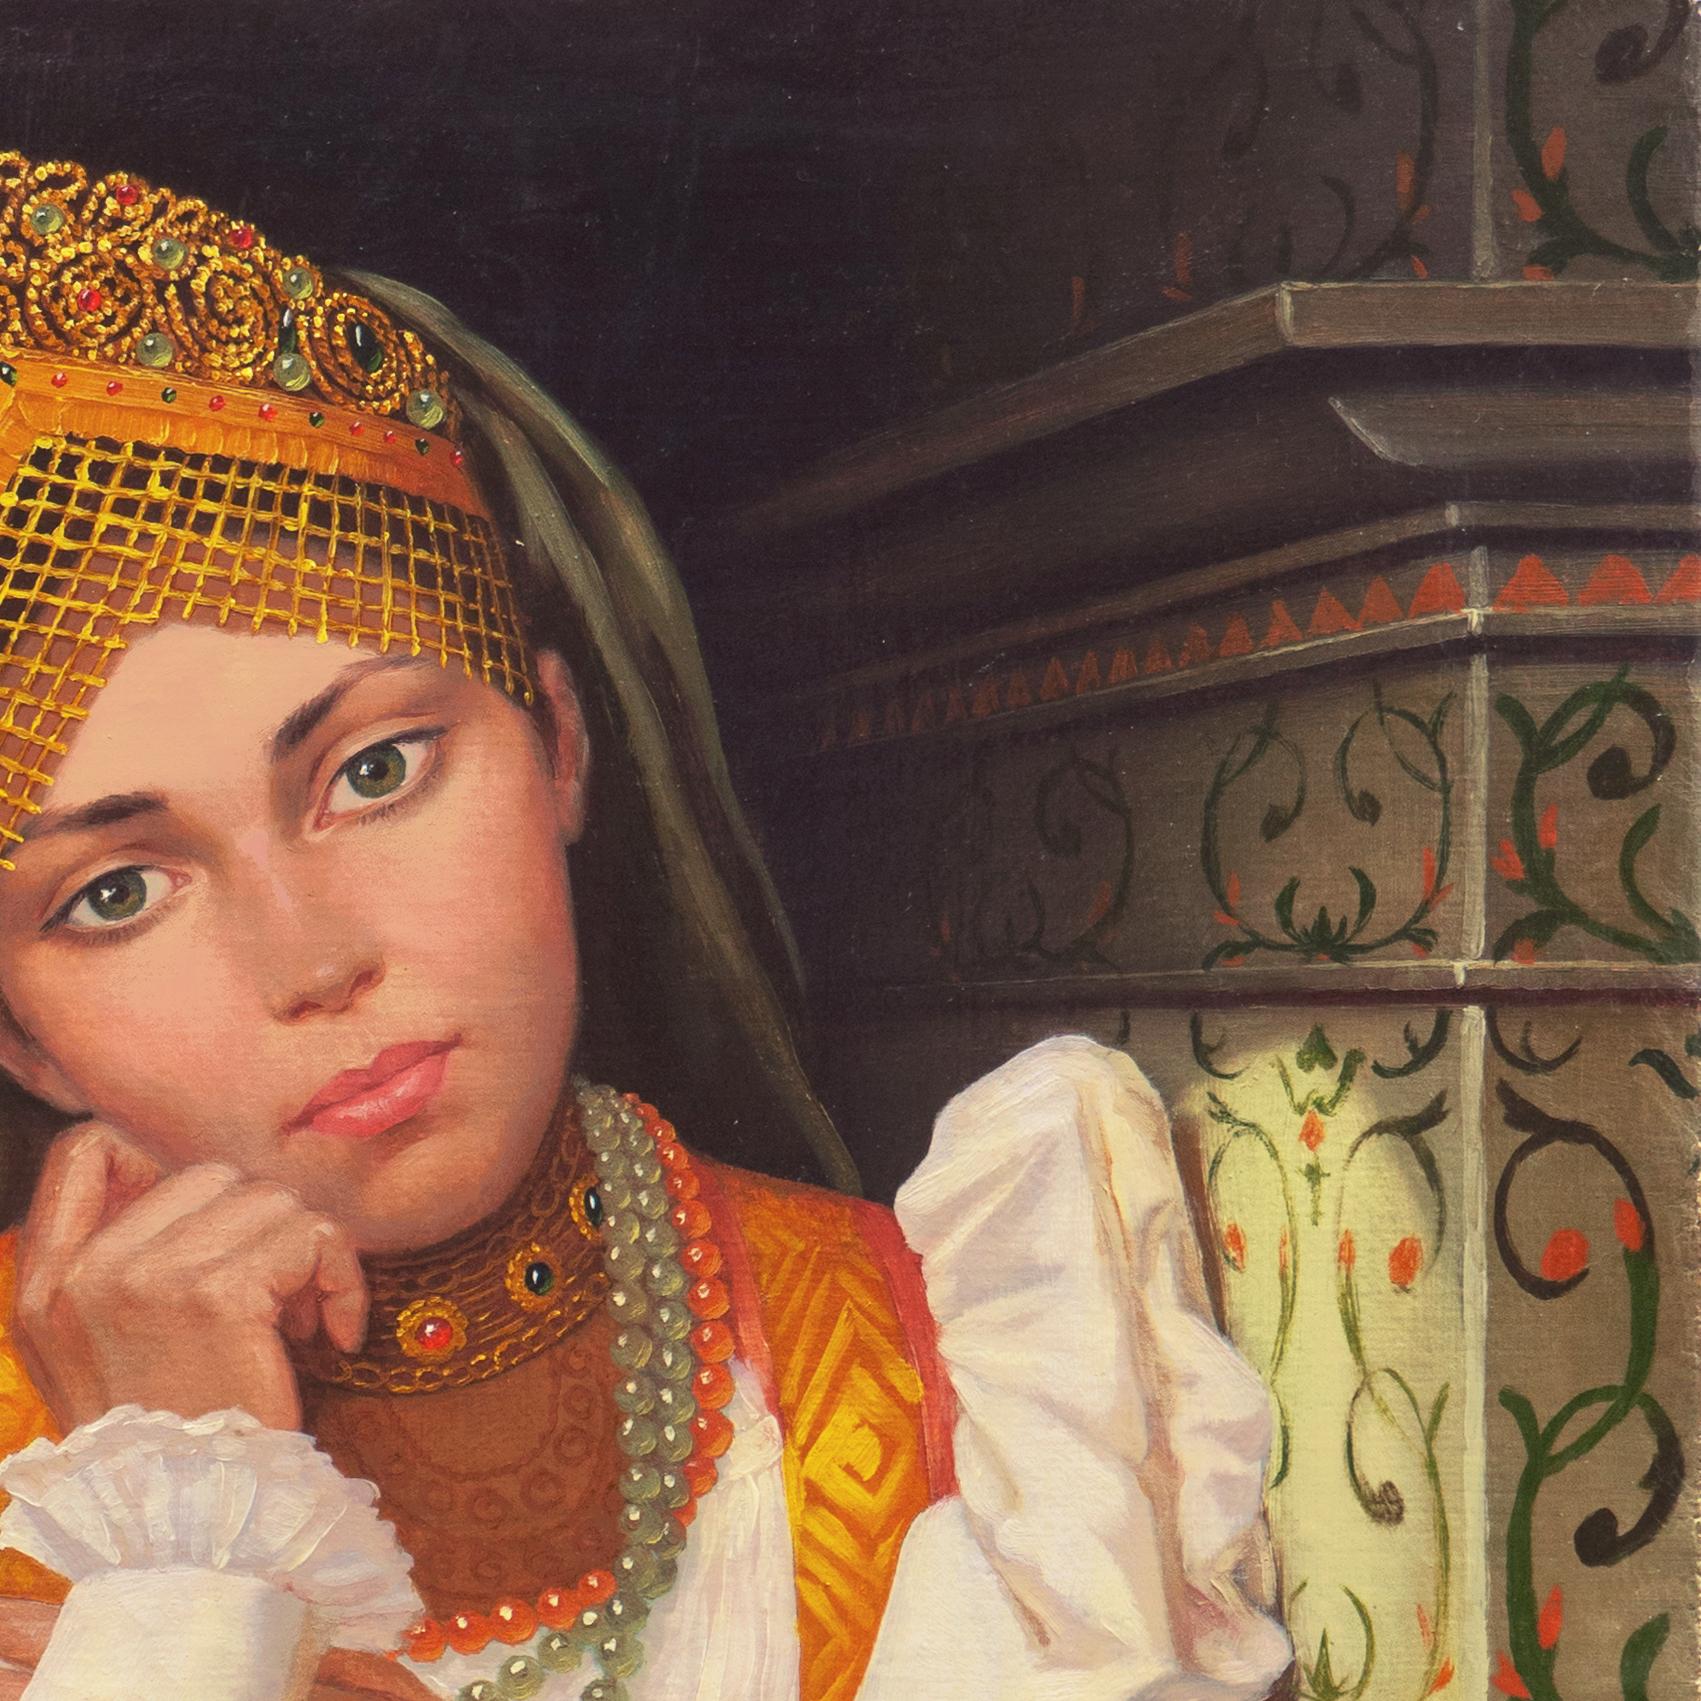 'Portrait of a Young Caucasian Woman', Traditional Folk Dress, Russian Orthodox - Realist Painting by A. Lihachev